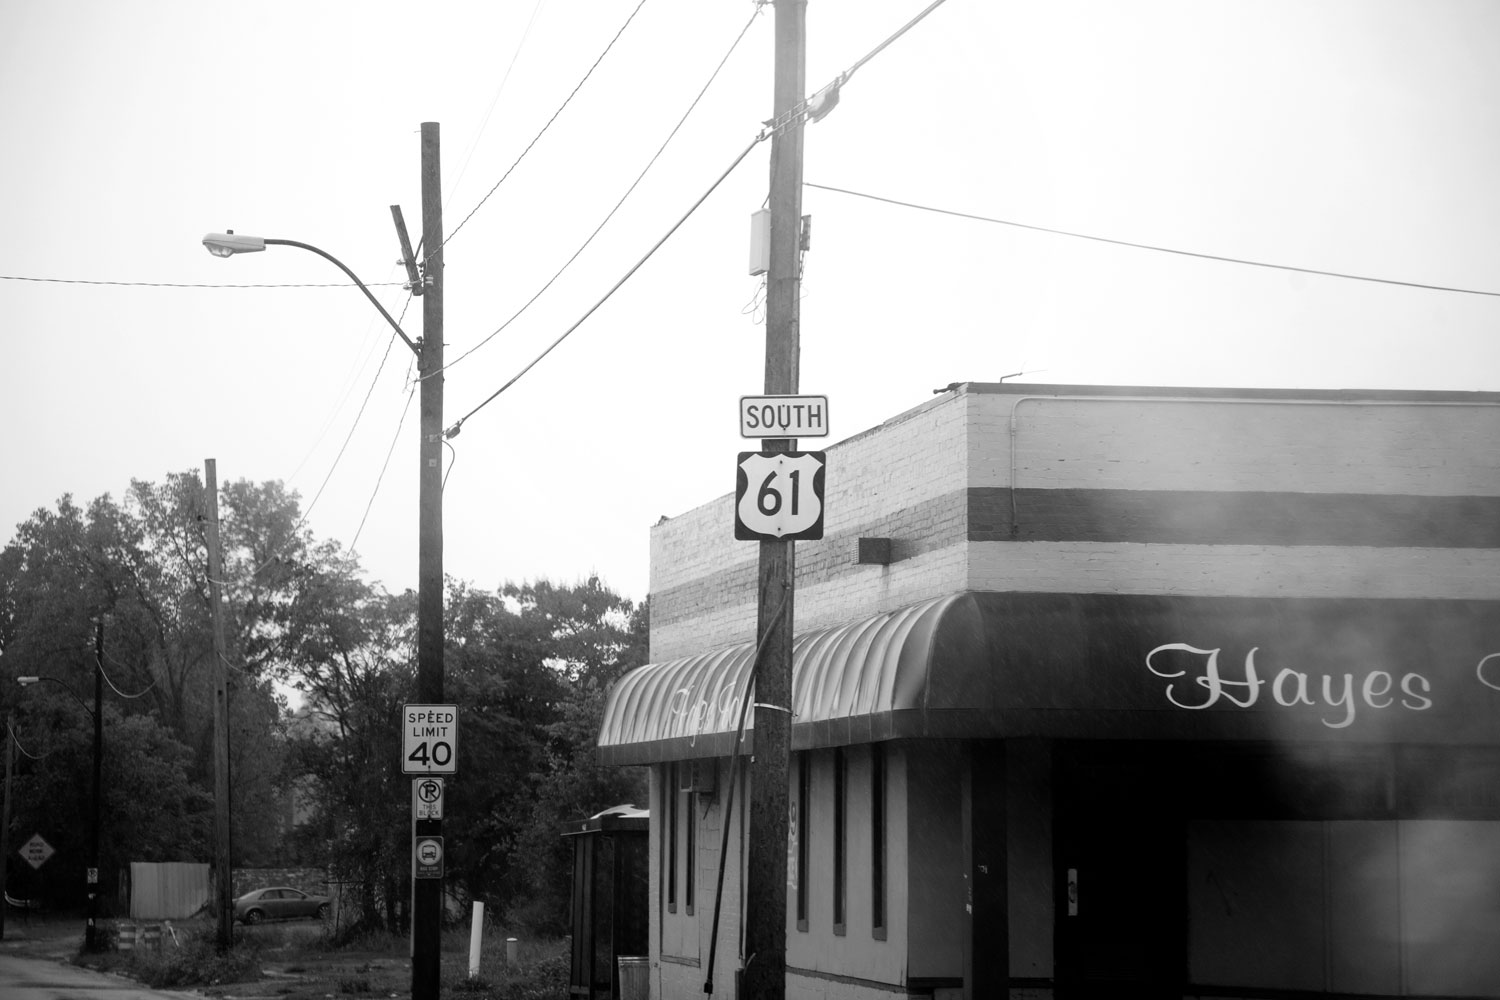 A roadside sign for Route 61 along the route between Memphis, Tenn. and Clarksdale, Miss.